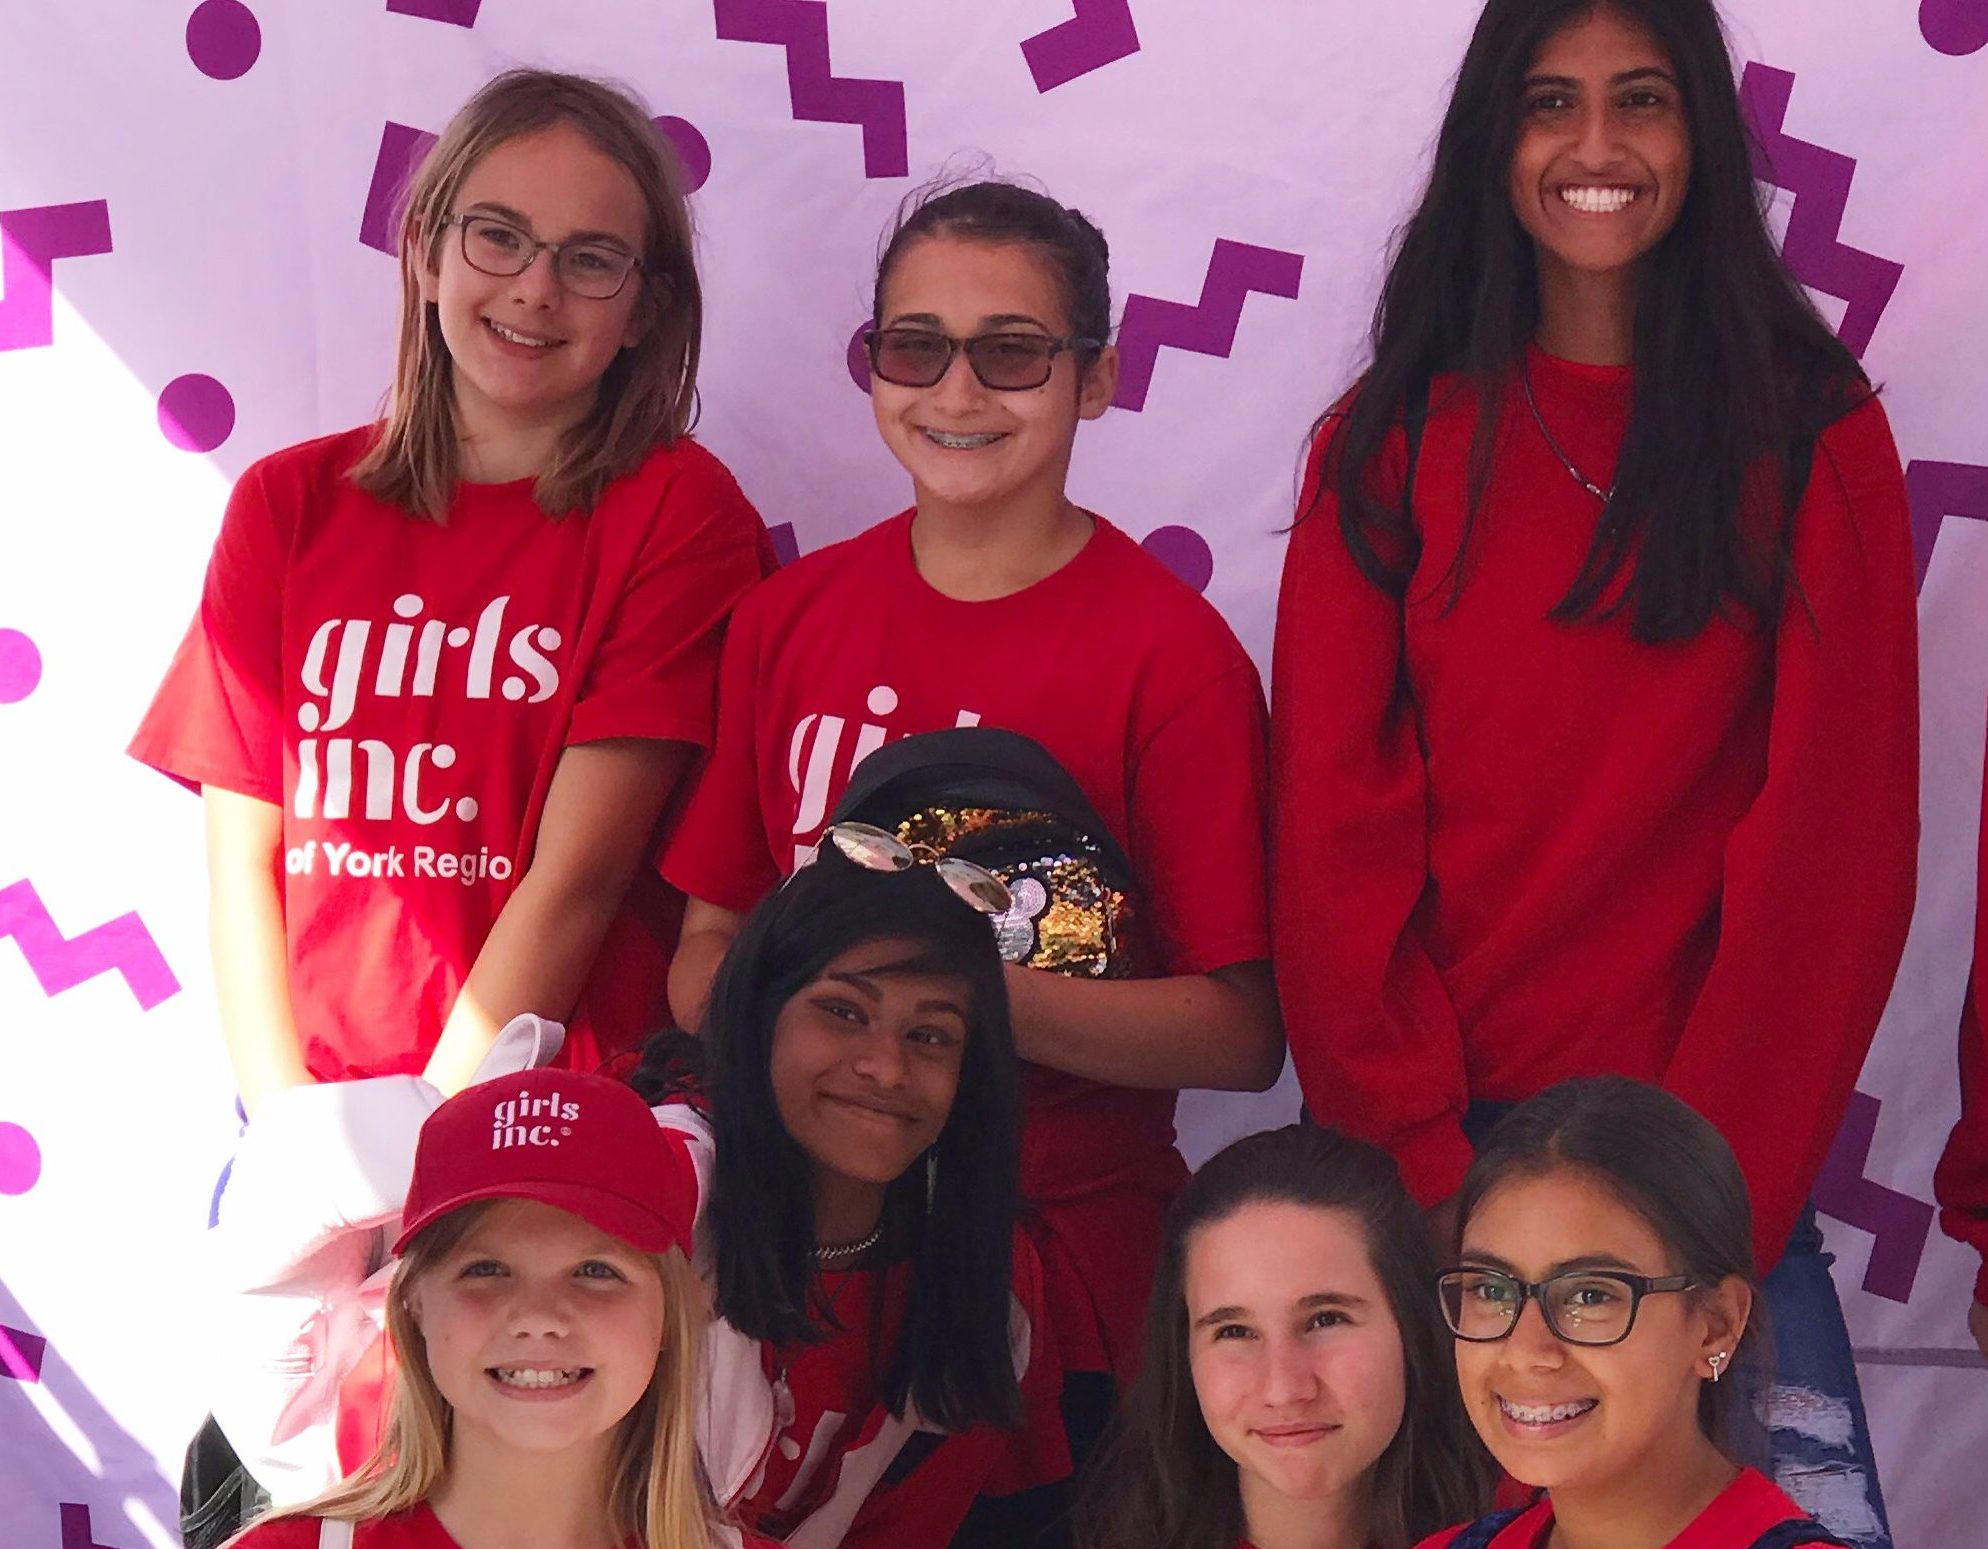 Girls Inc. of York Region  Inspiring all girls to be strong, smart and  bold!